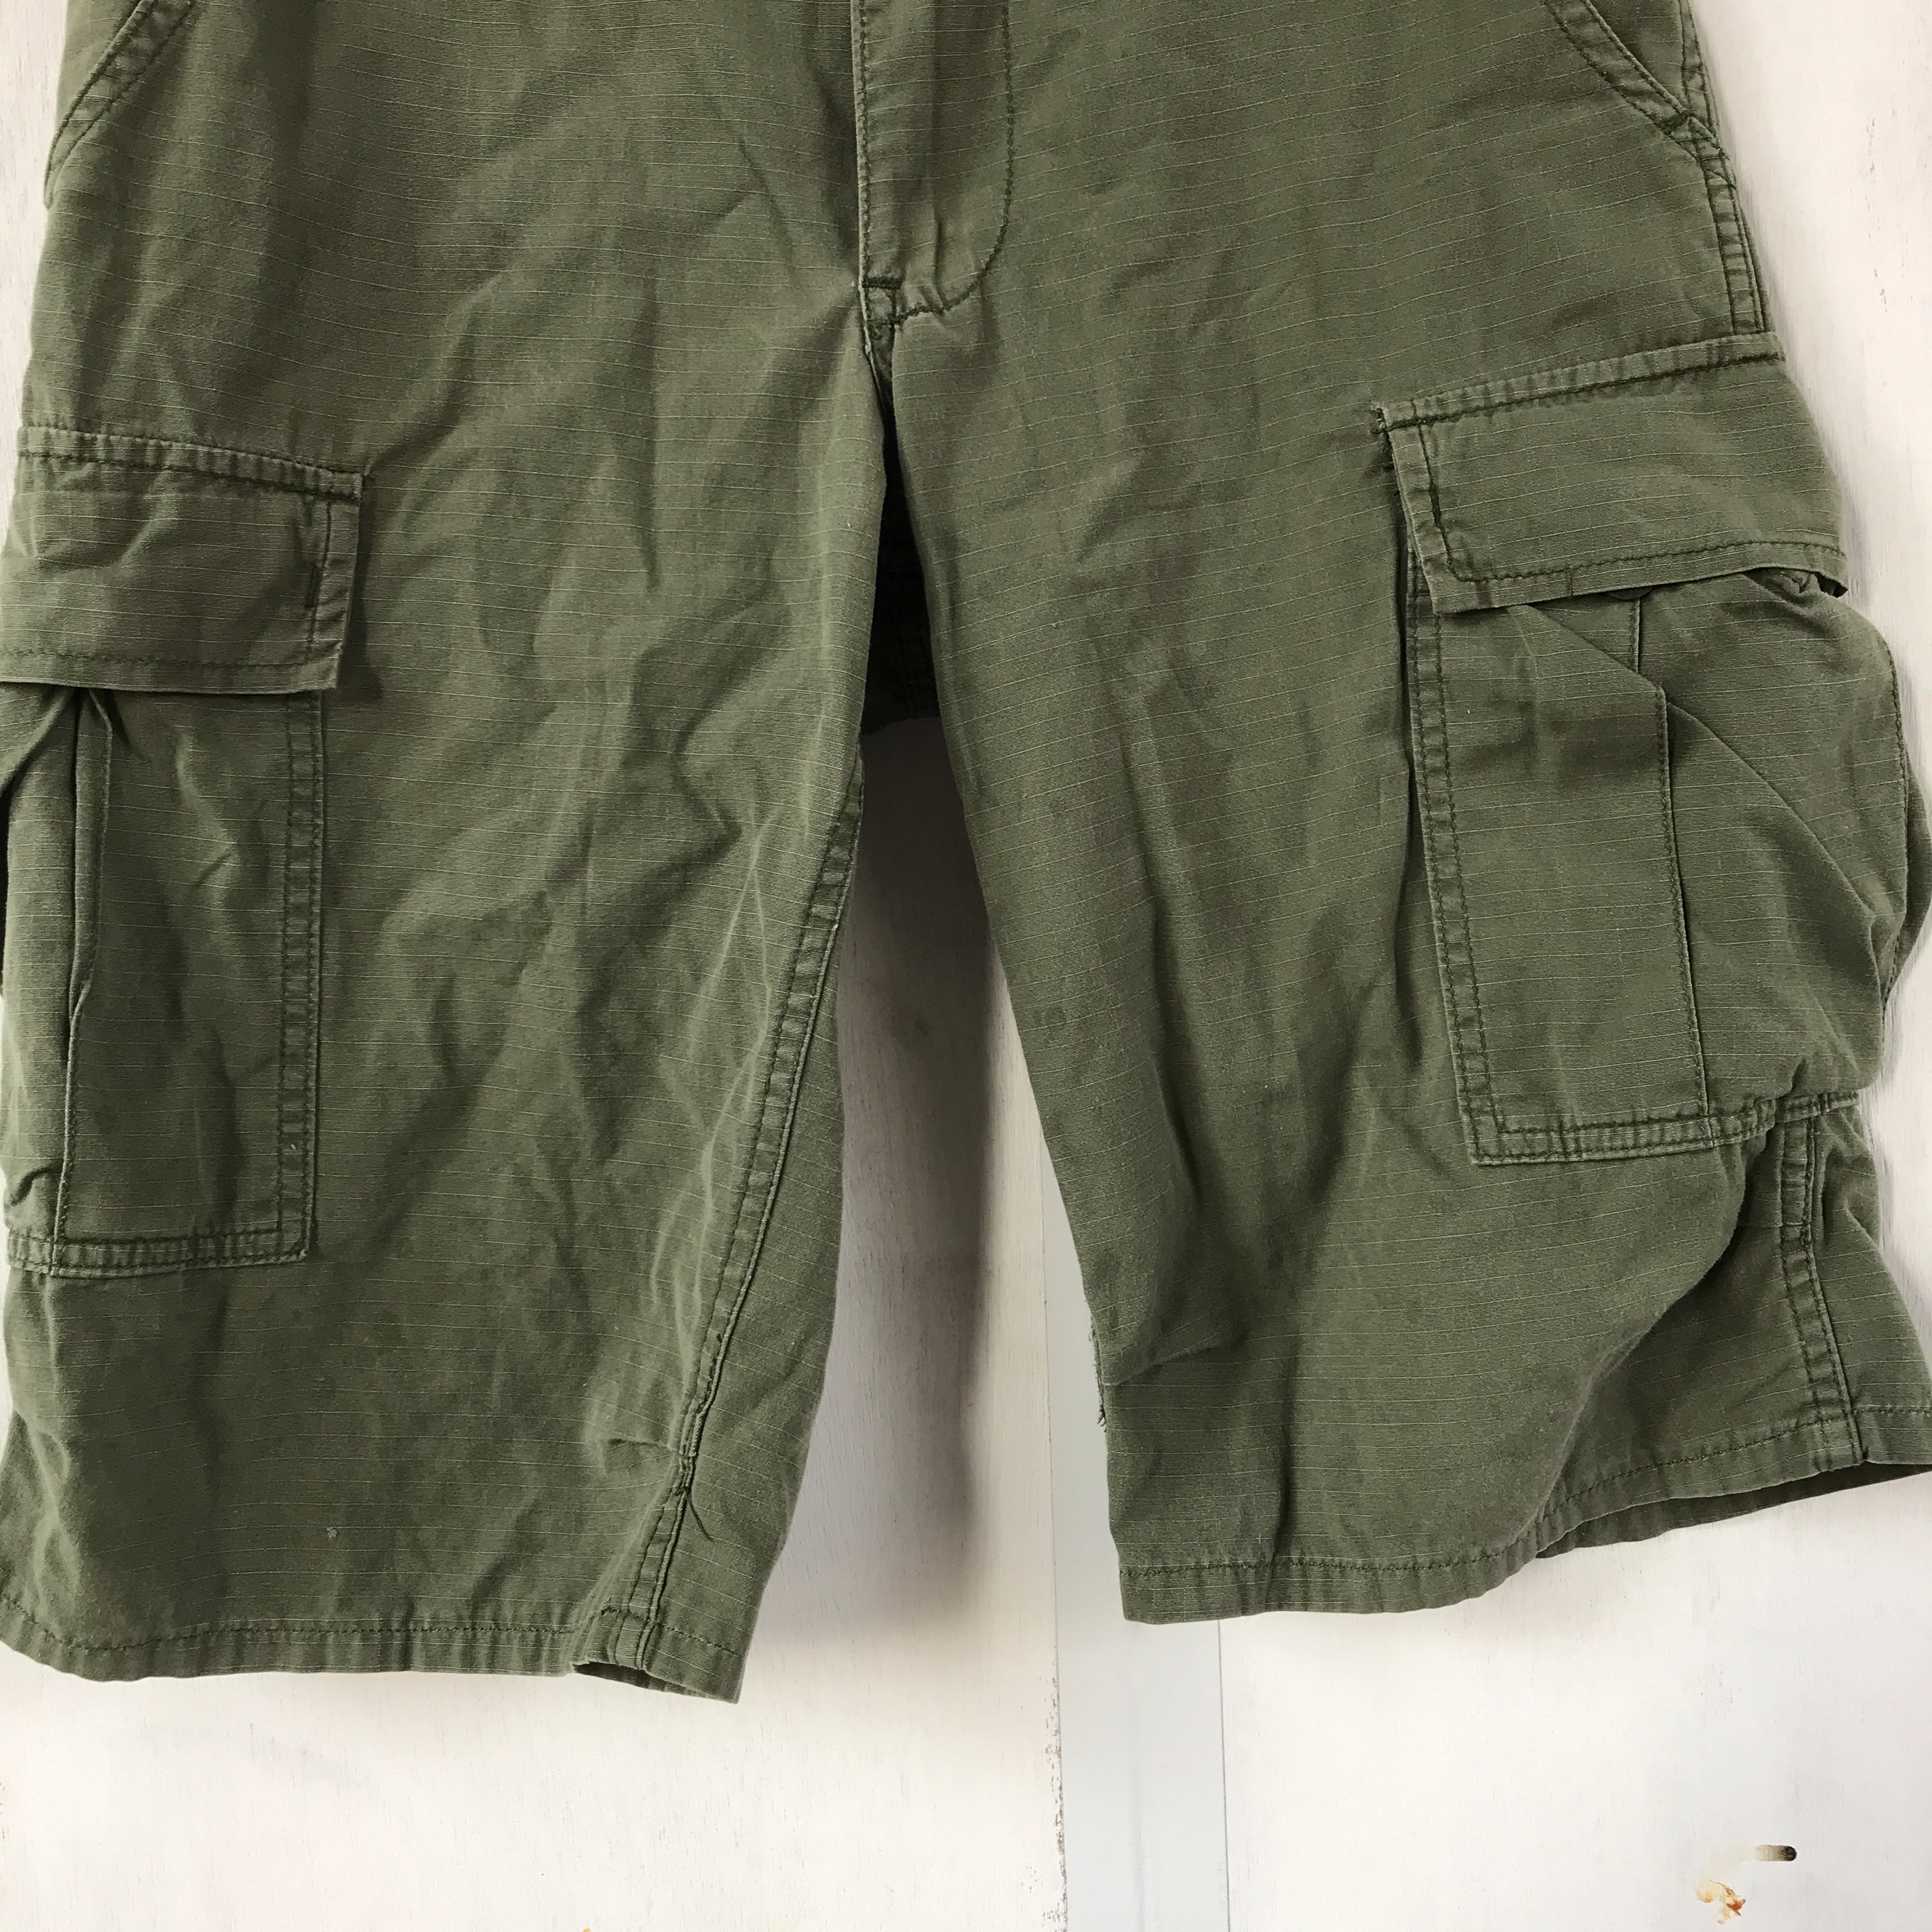 [ ONLY ONE ! ] US ARMED FORCES JUNGLE FATIGUE TROUSERS CUT OFF / U.S.ARMY